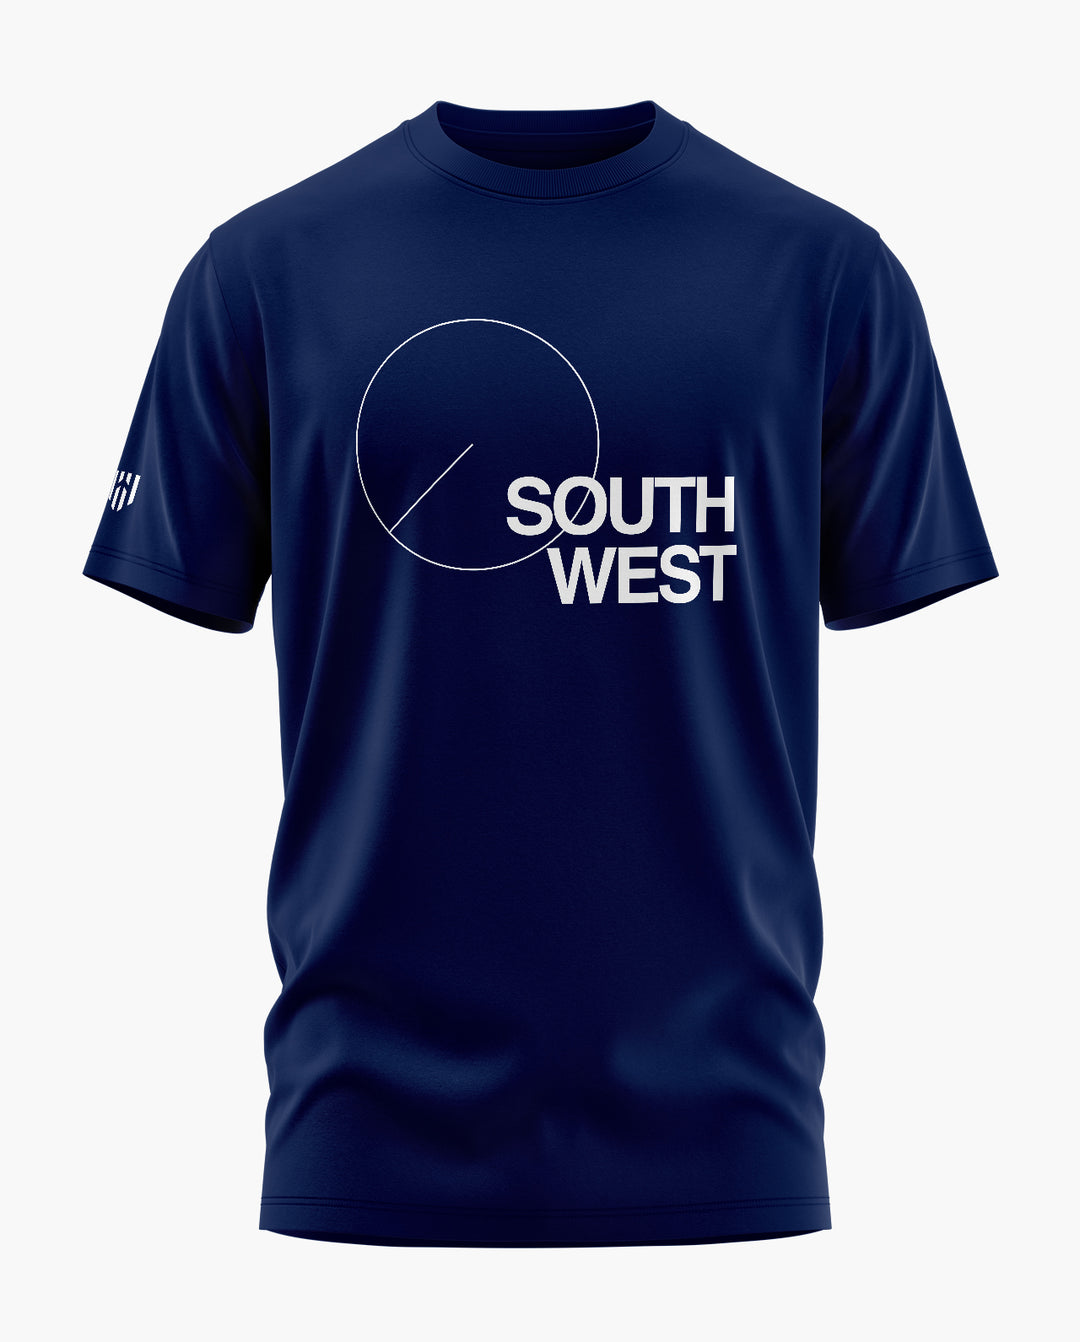 Direction South West T-Shirt